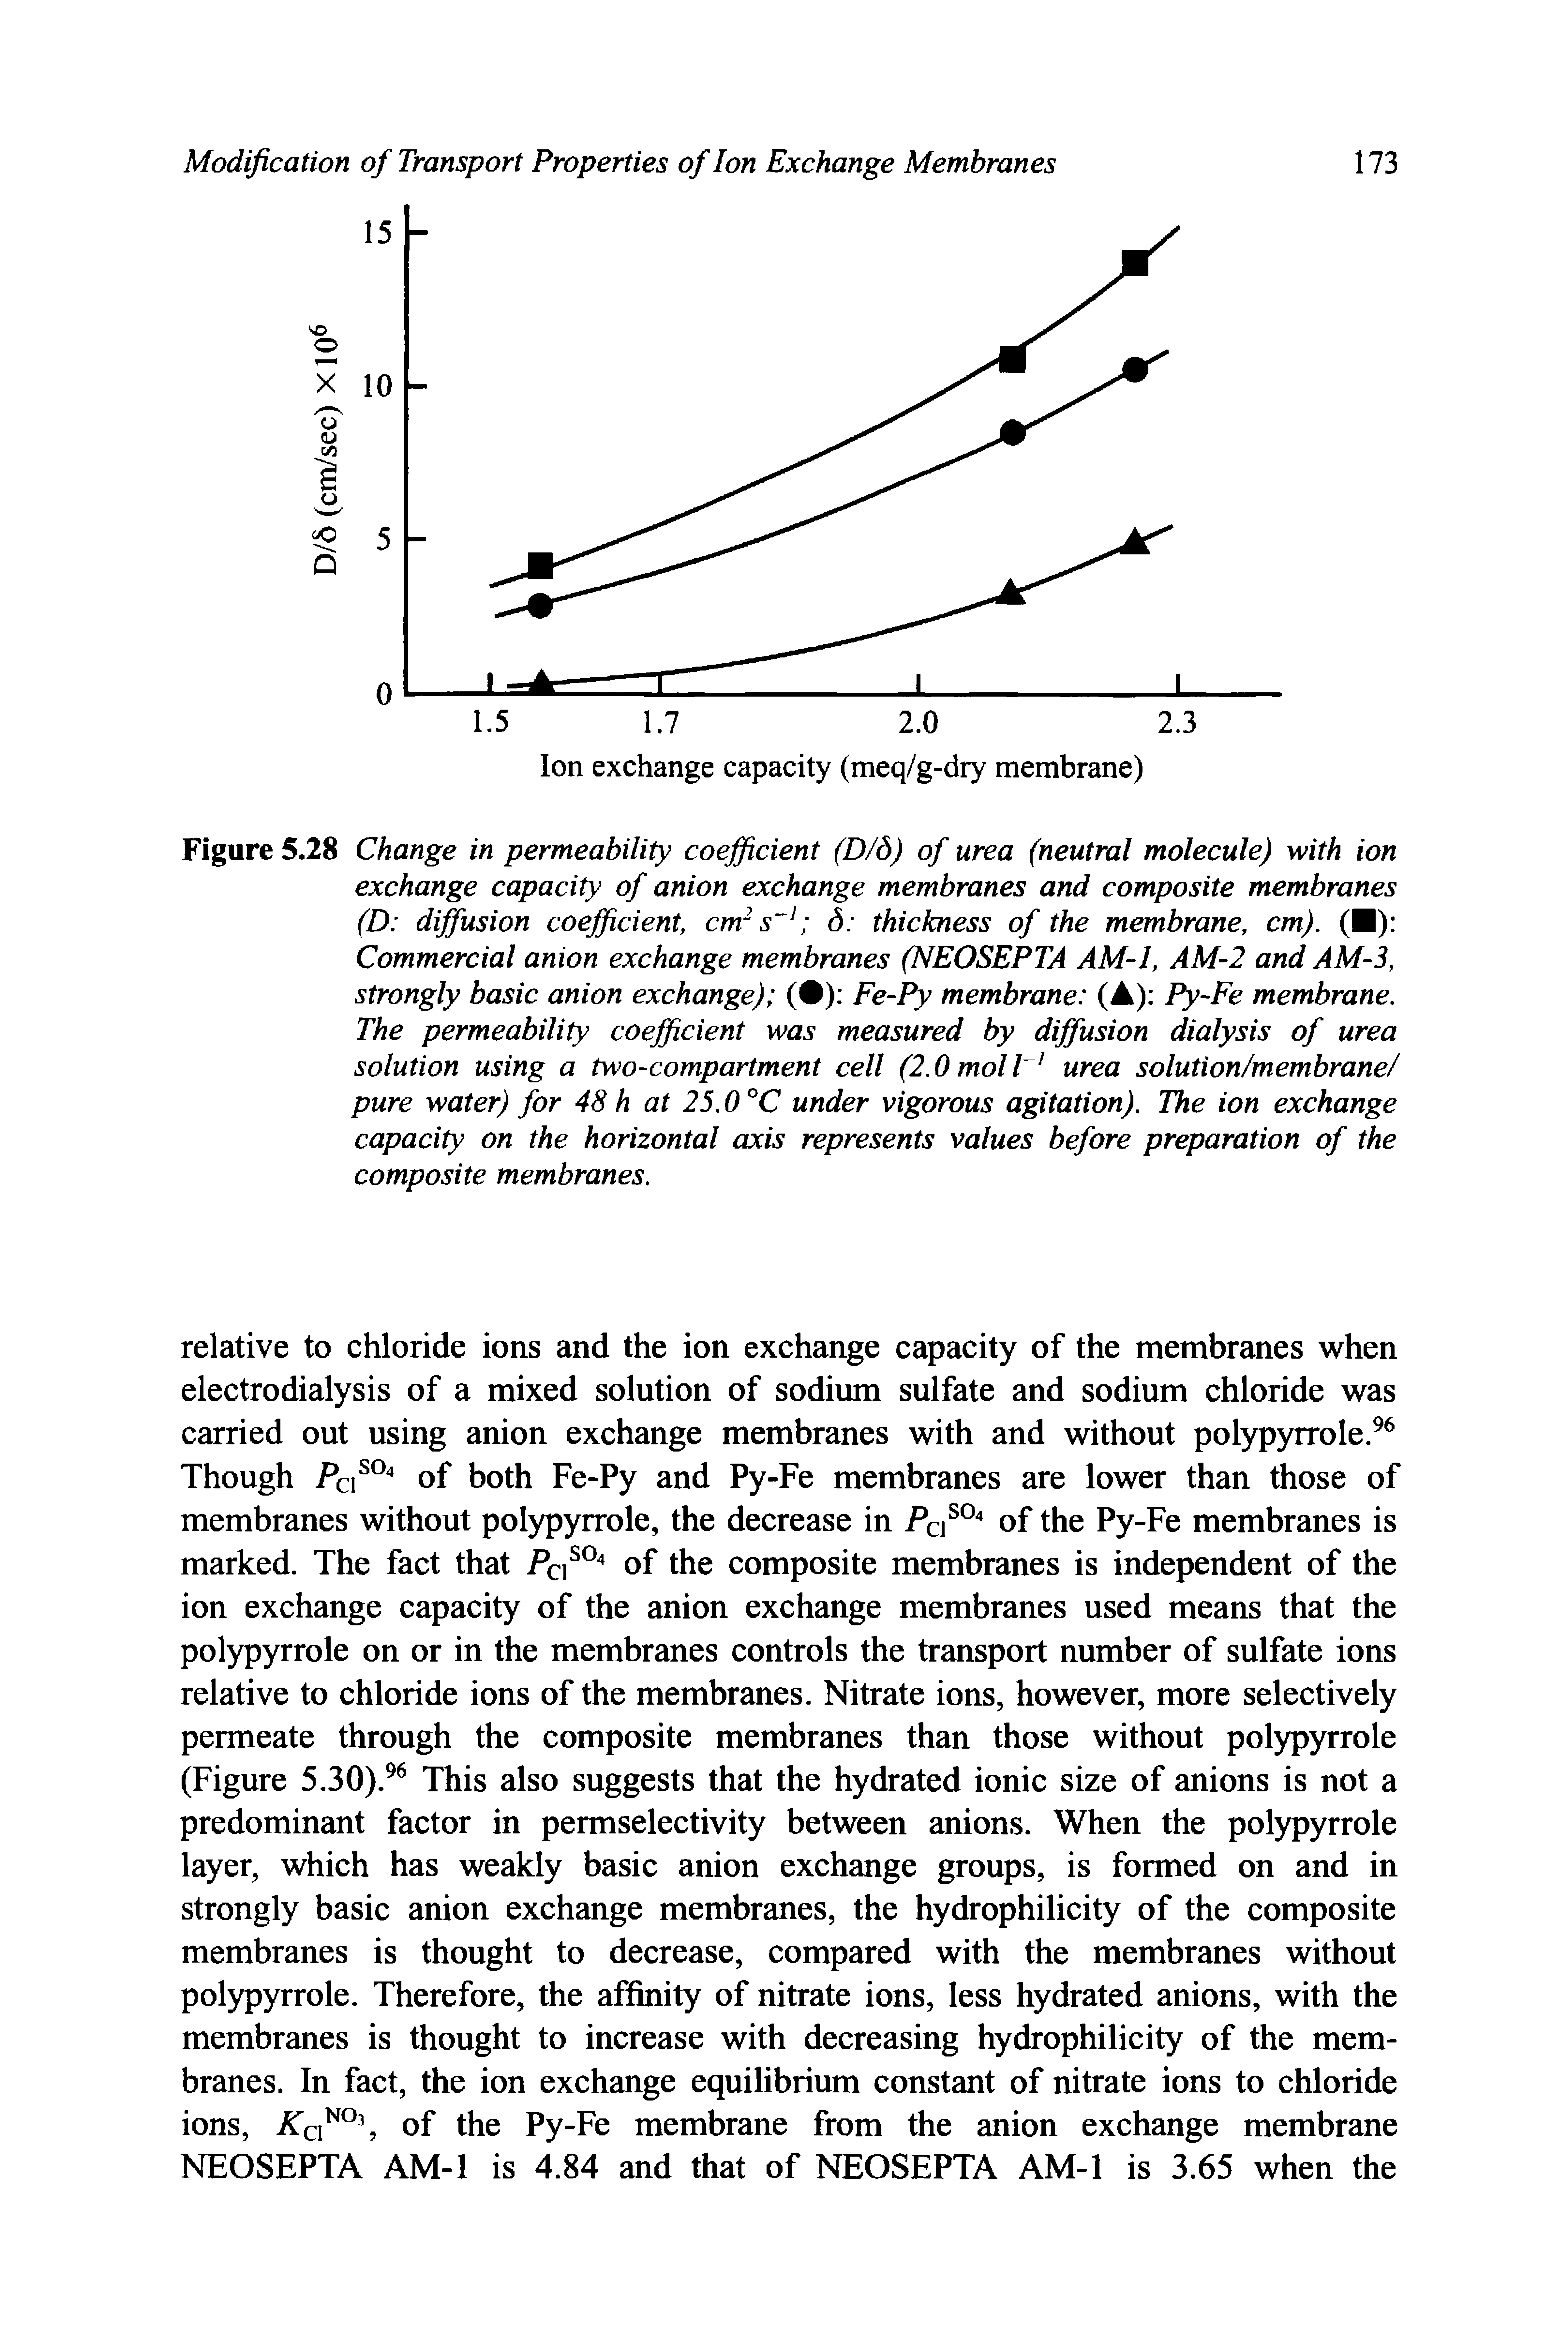 Figure 5.28 Change in permeability coefficient (D/6) of urea (neutral molecule) with ion exchange capacity of anion exchange membranes and composite membranes (D diffusion coefficient, cm2 s 6 thickness of the membrane, cm). ( ) Commercial anion exchange membranes (NEOSEPTA AM-1, AM-2 and AM-3, strongly basic anion exchange) ( ) Fe-Py membrane (A) Py-Fe membrane. The permeability coefficient was measured by diffusion dialysis of urea solution using a two-compartment cell (2.0 mol l urea solution/membrane/ pure water) for 48 h at 25.0 °C under vigorous agitation). The ion exchange capacity on the horizontal axis represents values before preparation of the composite membranes.